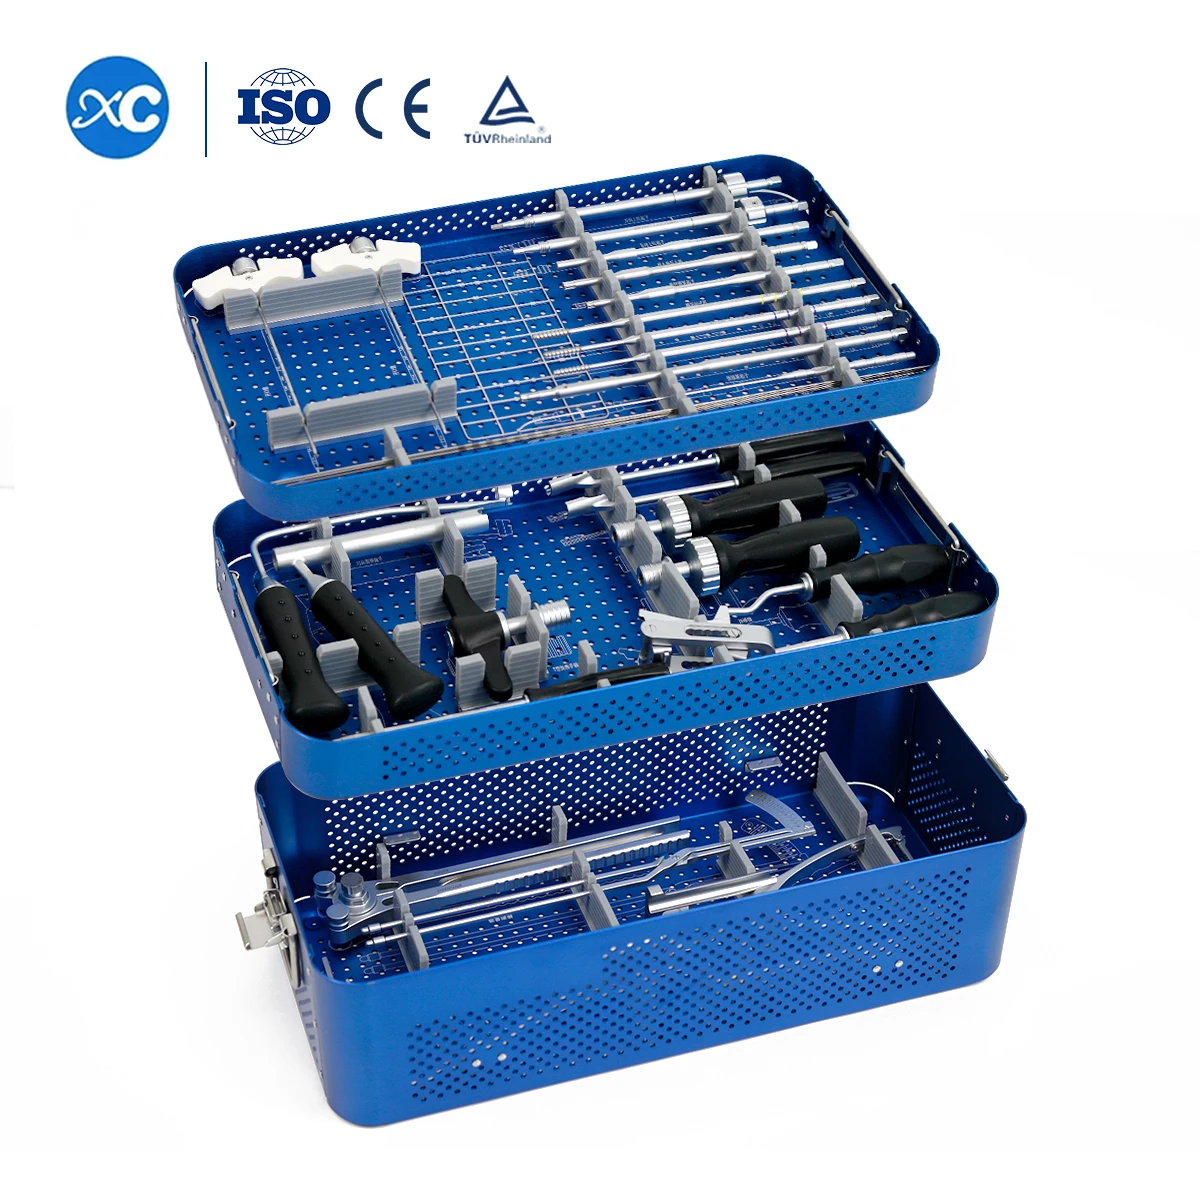 

Orthopedic Products 5.5 System MIS Spinal Pedicle Screw Spine Rod System Minimally Invasive Instrument Kit